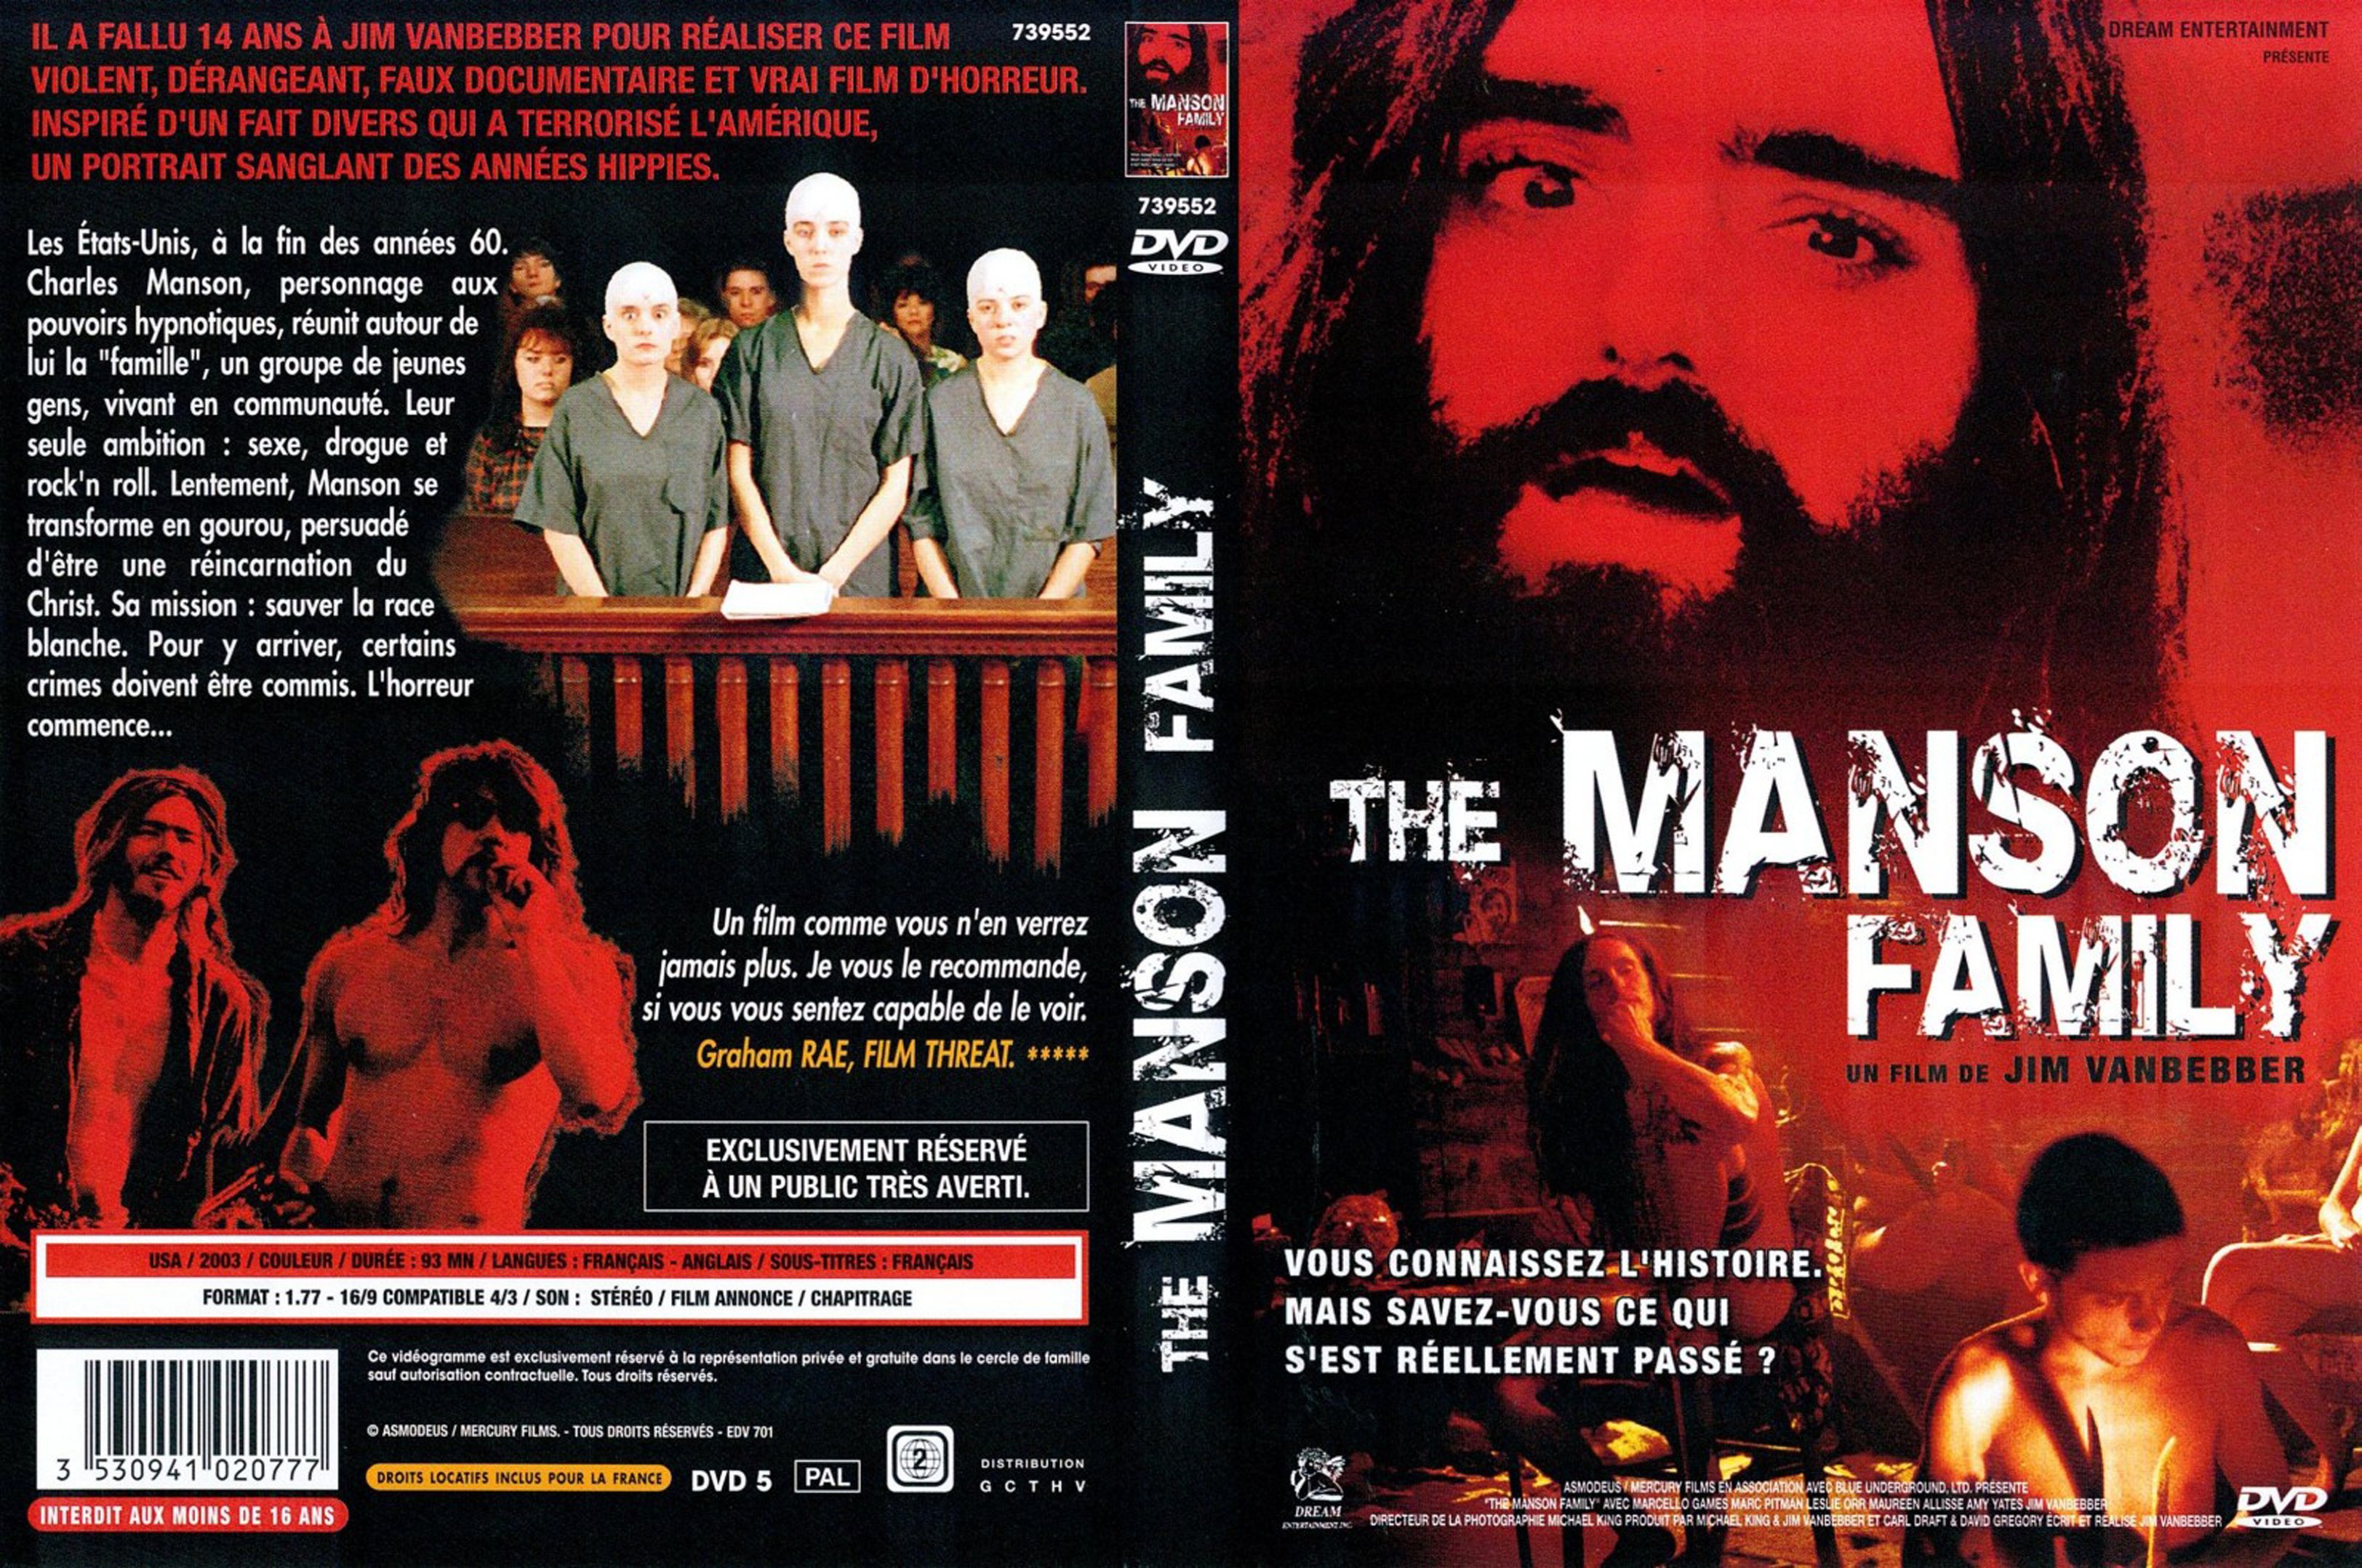 Jaquette DVD The manson family